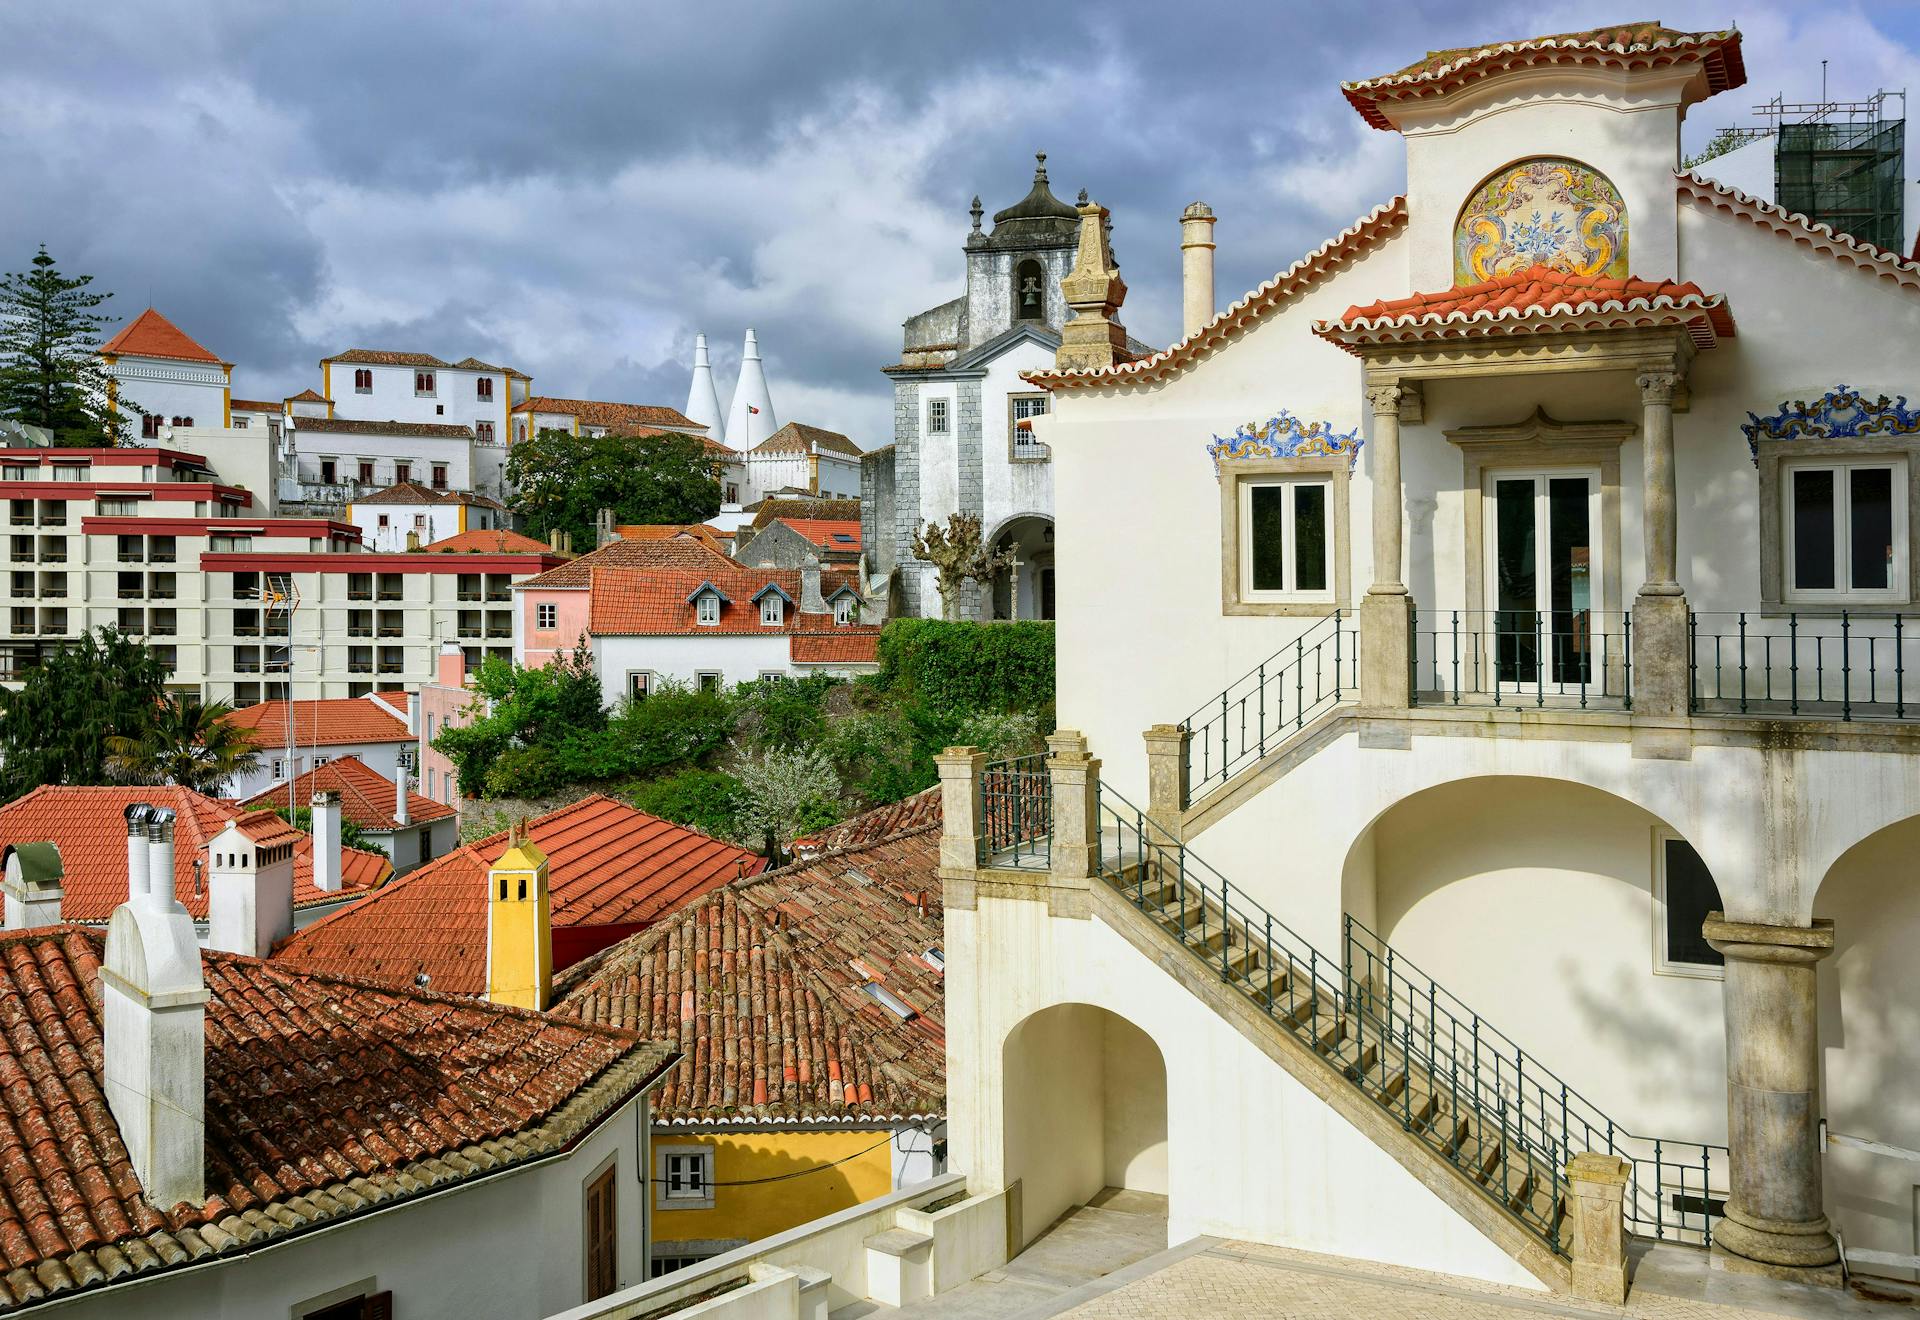 Residential houses in Sintra on a cloudy day. 